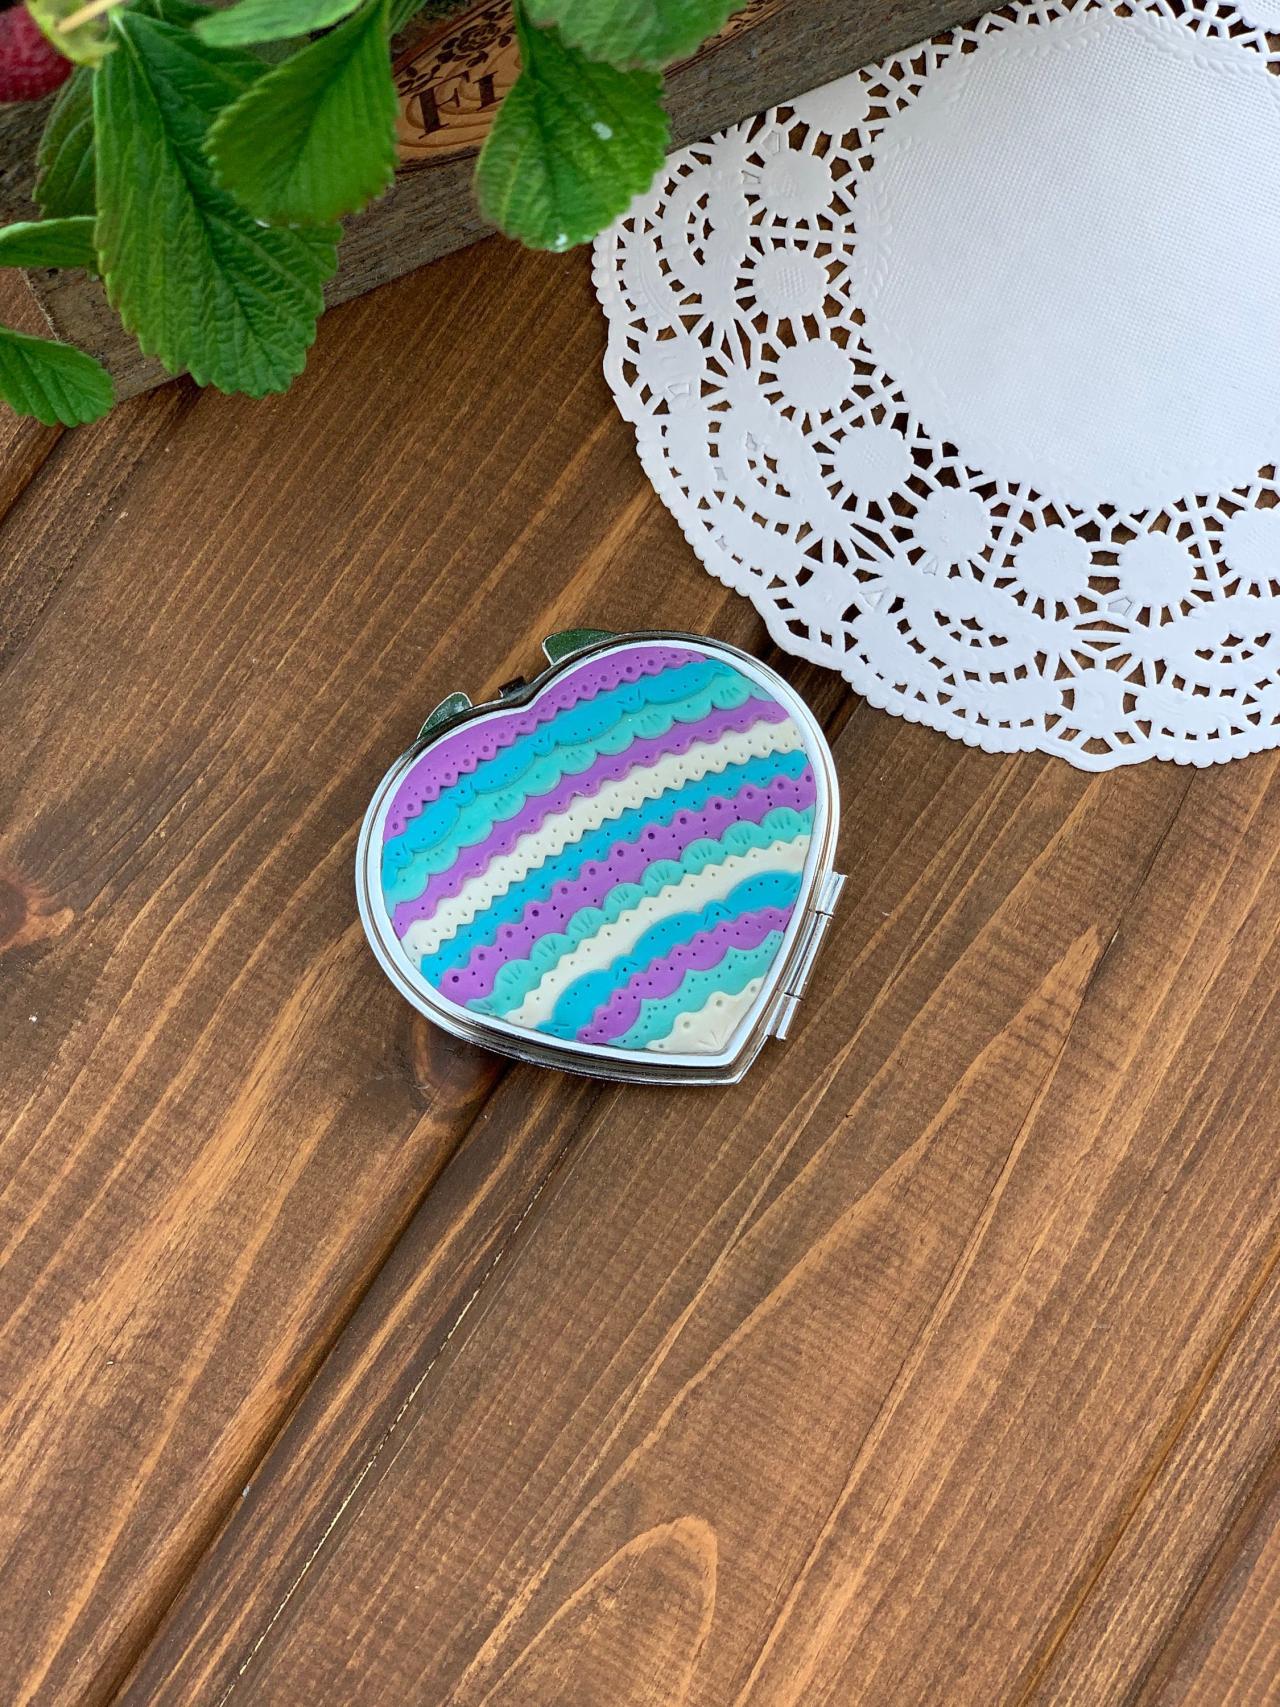 pocket mirror, decorated metal mirror, decorated lace mirror, small pocket mirror with decor, blue, mint, lilac, turquoise